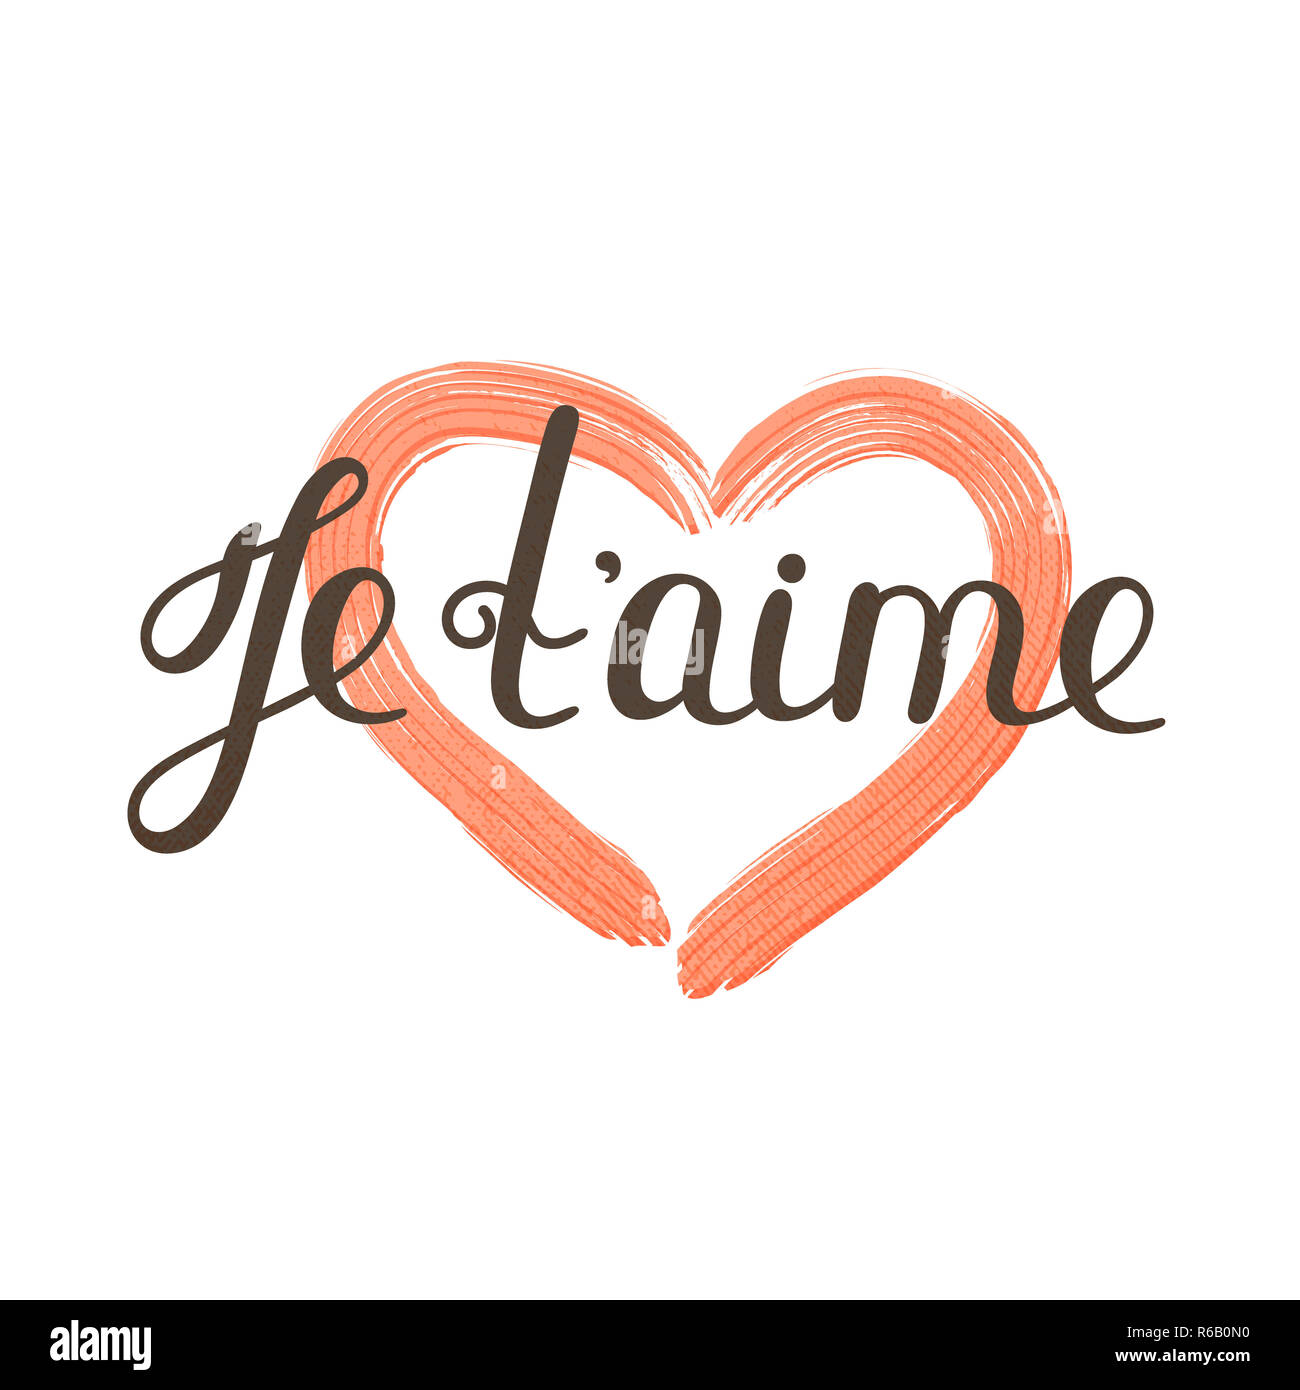 Je t'aime. French lettering. Handwritten romantic quote. Valentine's day. Textured heart. Holiday in February. Calligraphy Stock Photo